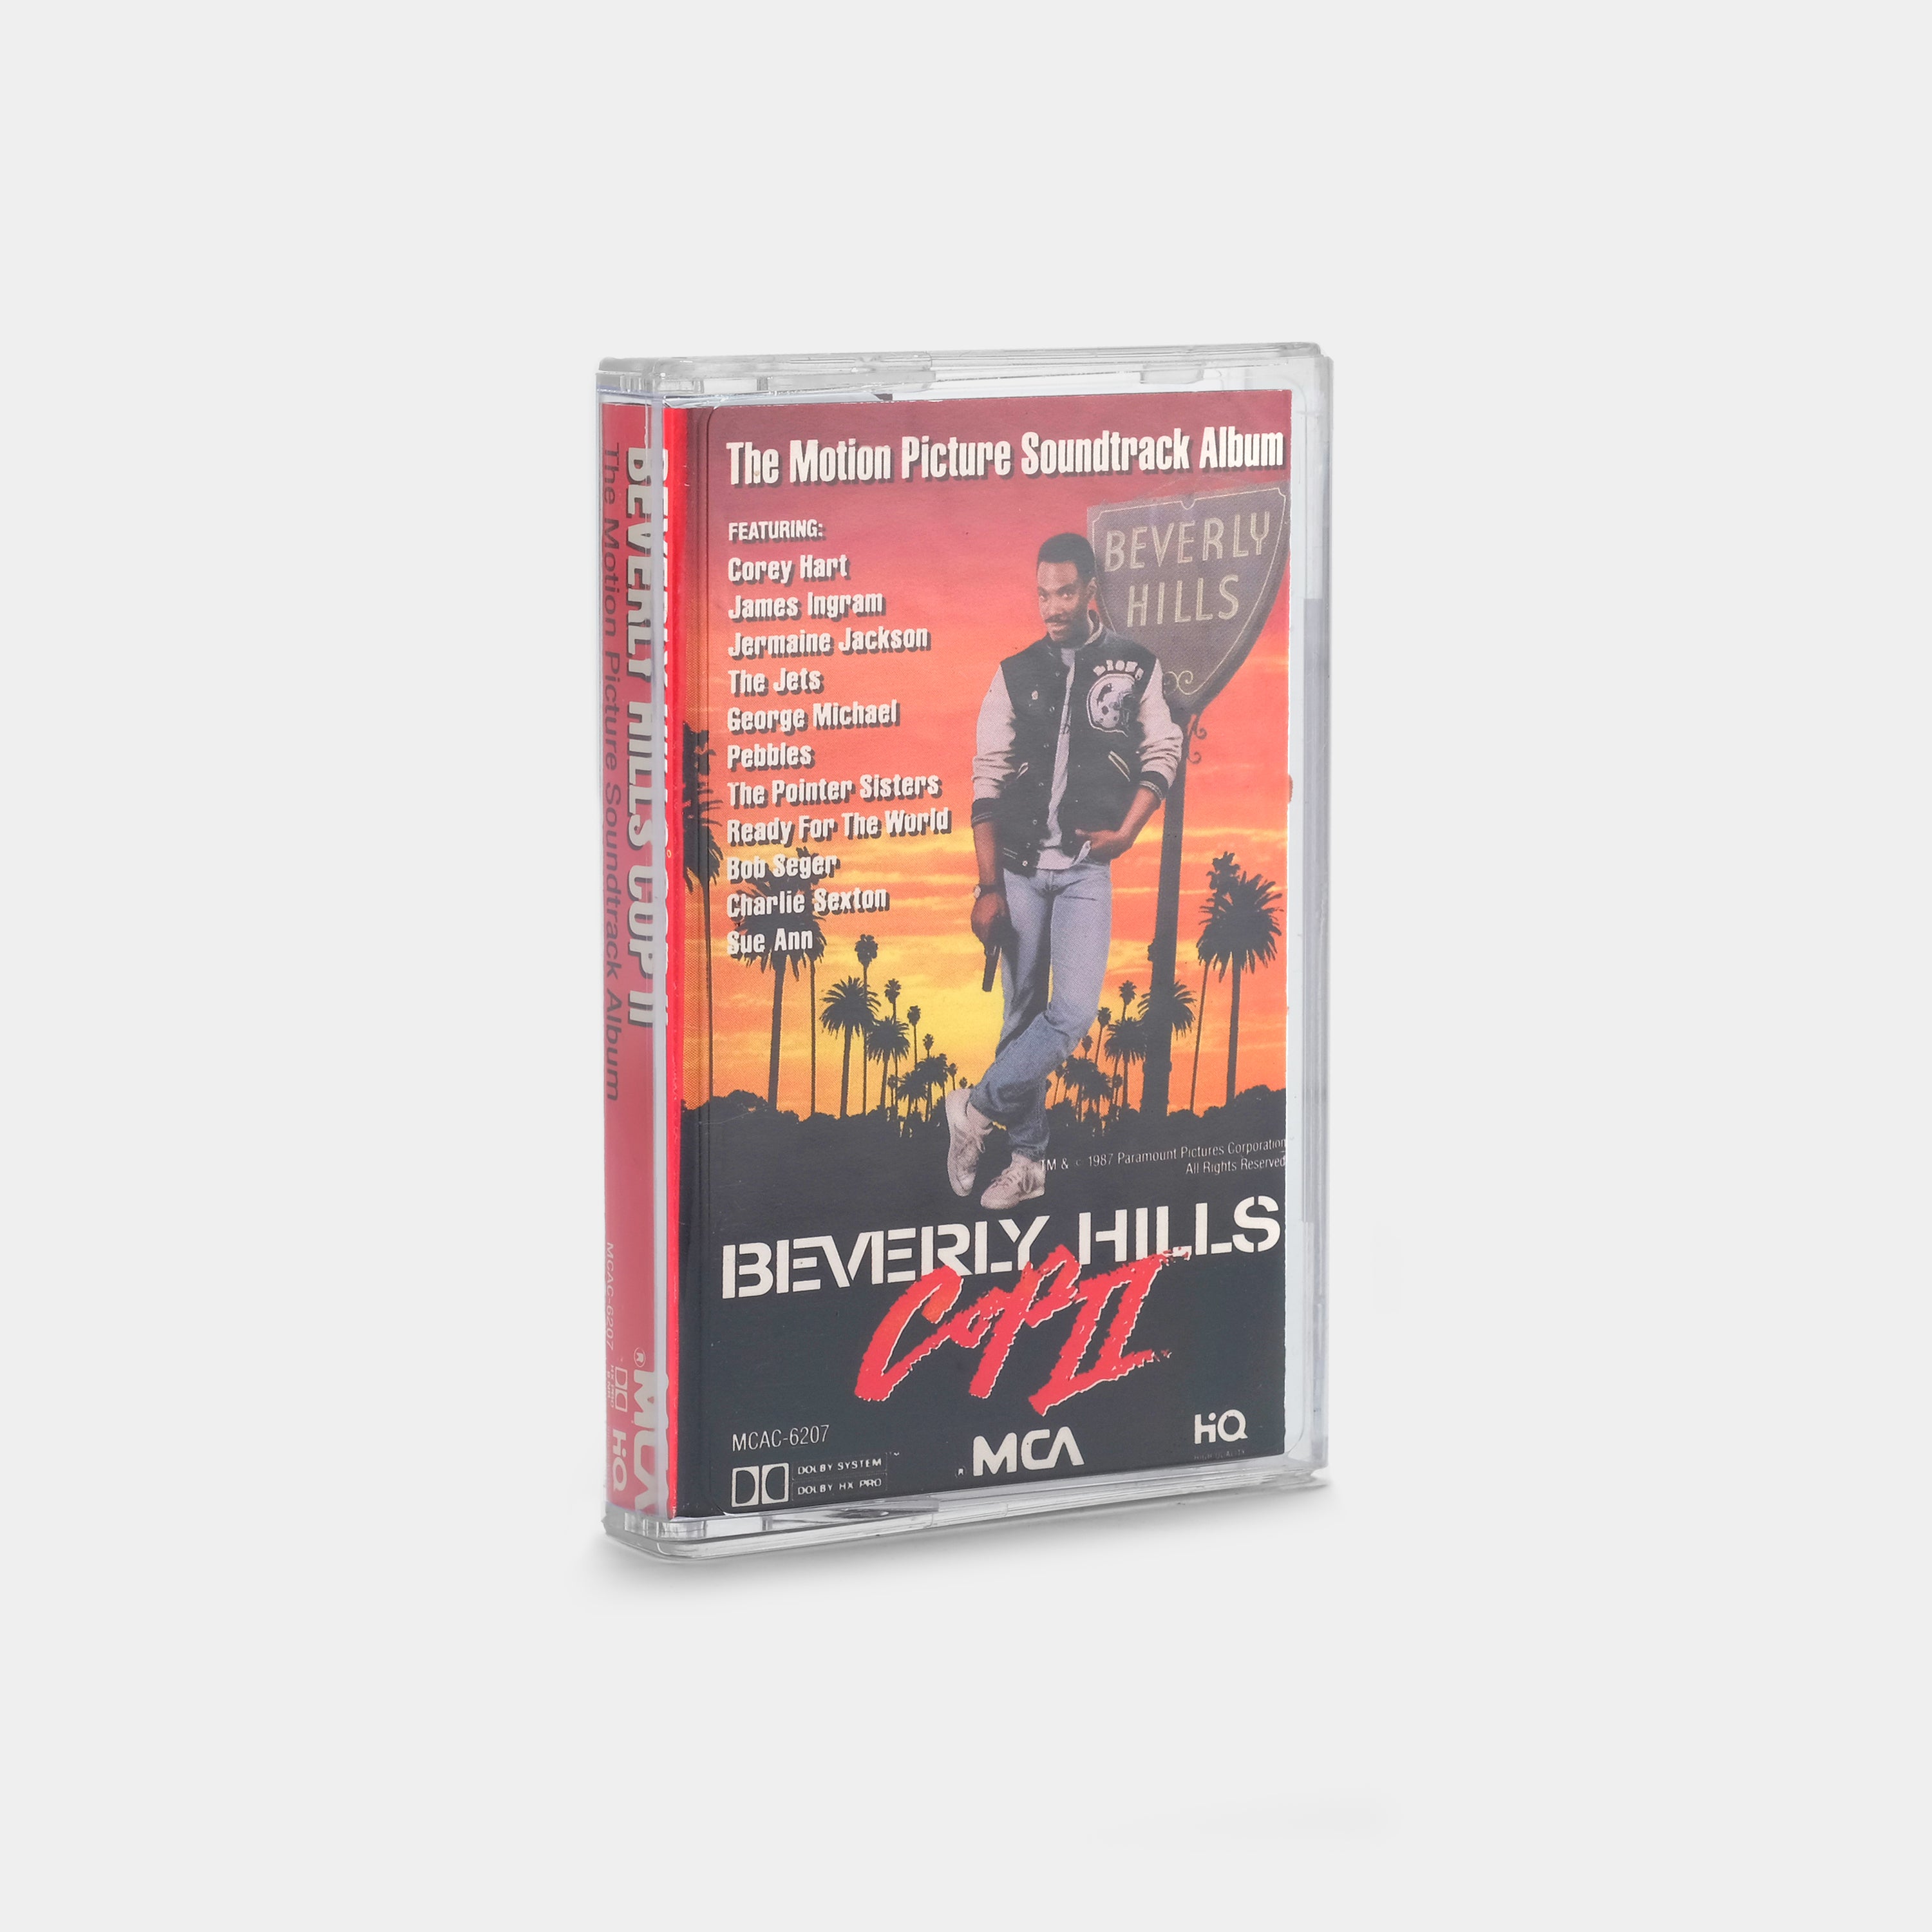 Beverly Hills Cop II: The Motion Picture Soundtrack Album Cassette Tape